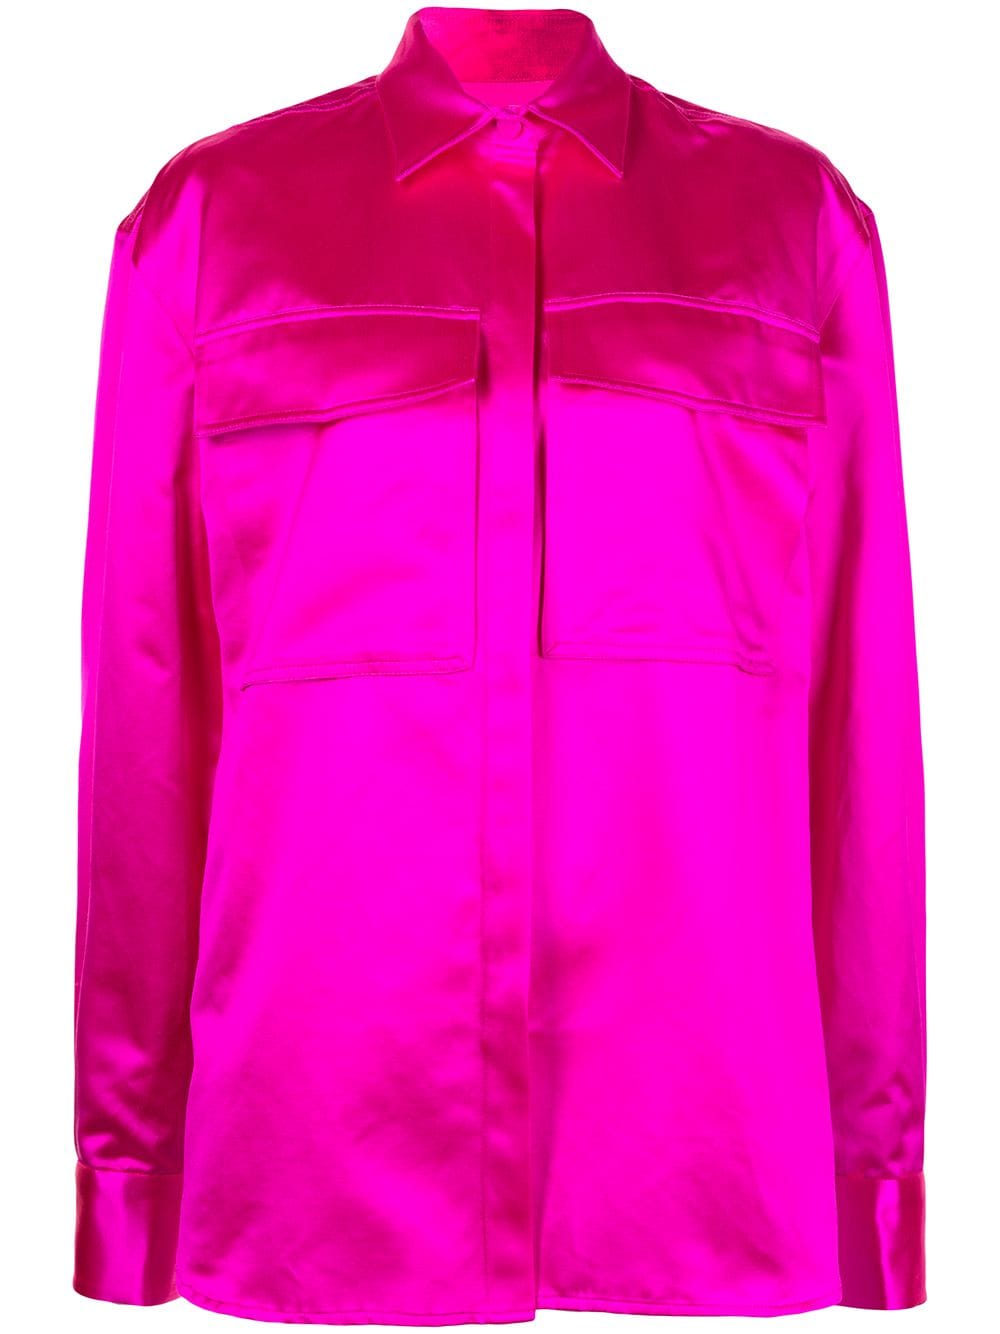 Alex Perry Duchesse Satin Boxy Shirt In Pink